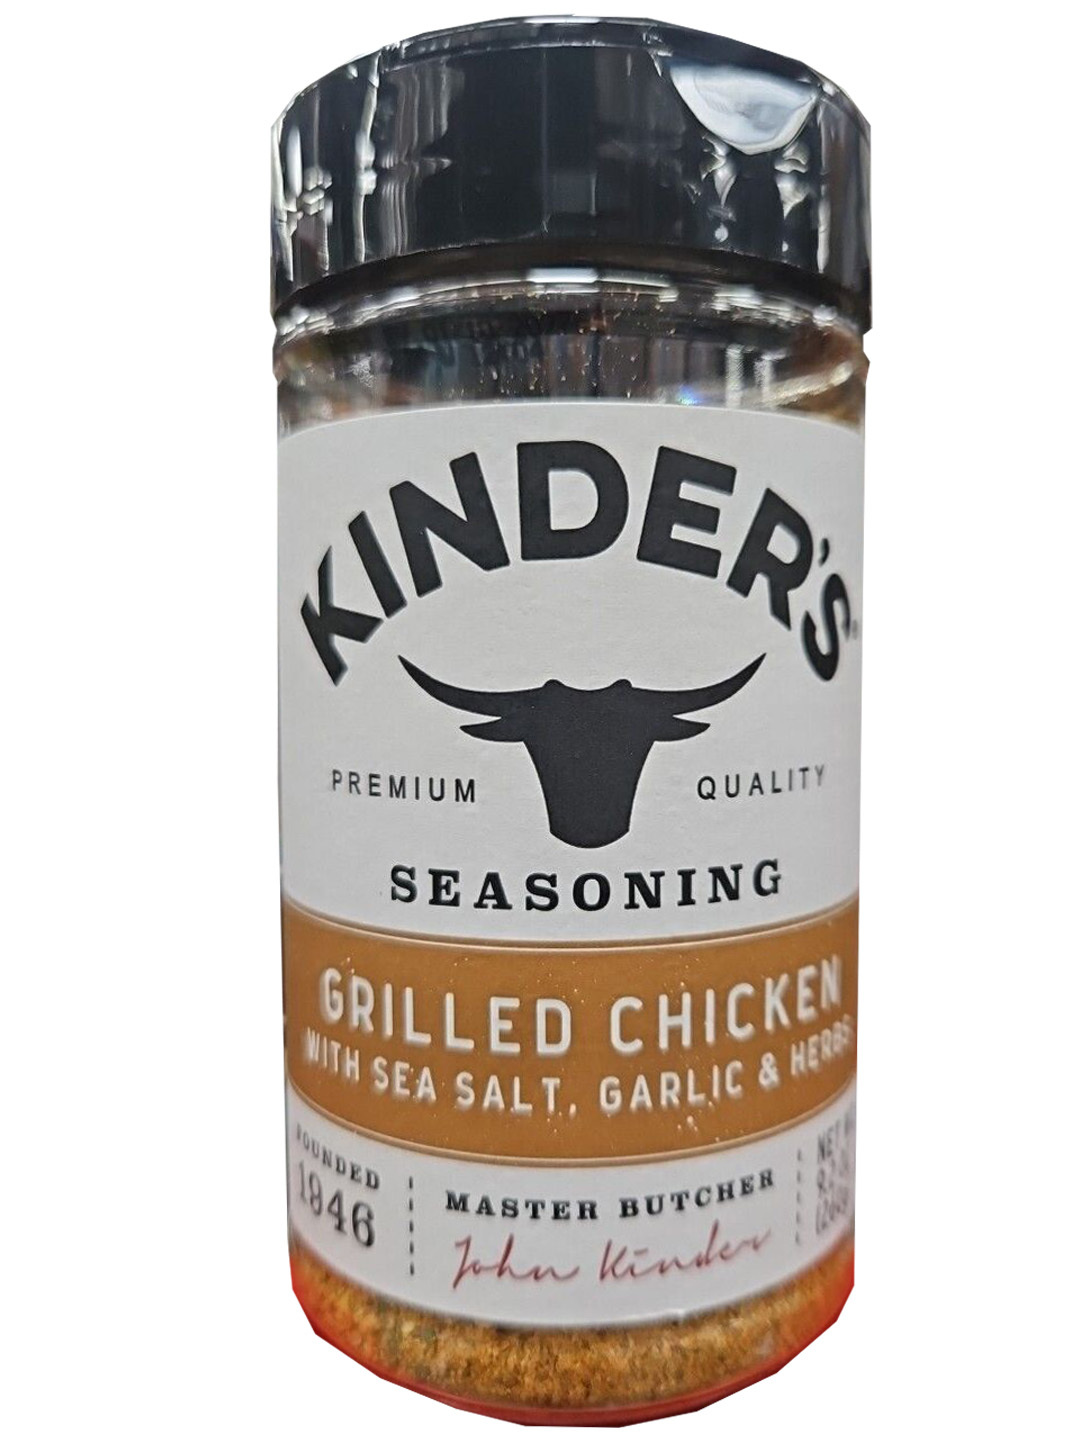 Primary image for Kinder's Seasoning Grilled Chicken with Sea Salt Garlic &Herbs